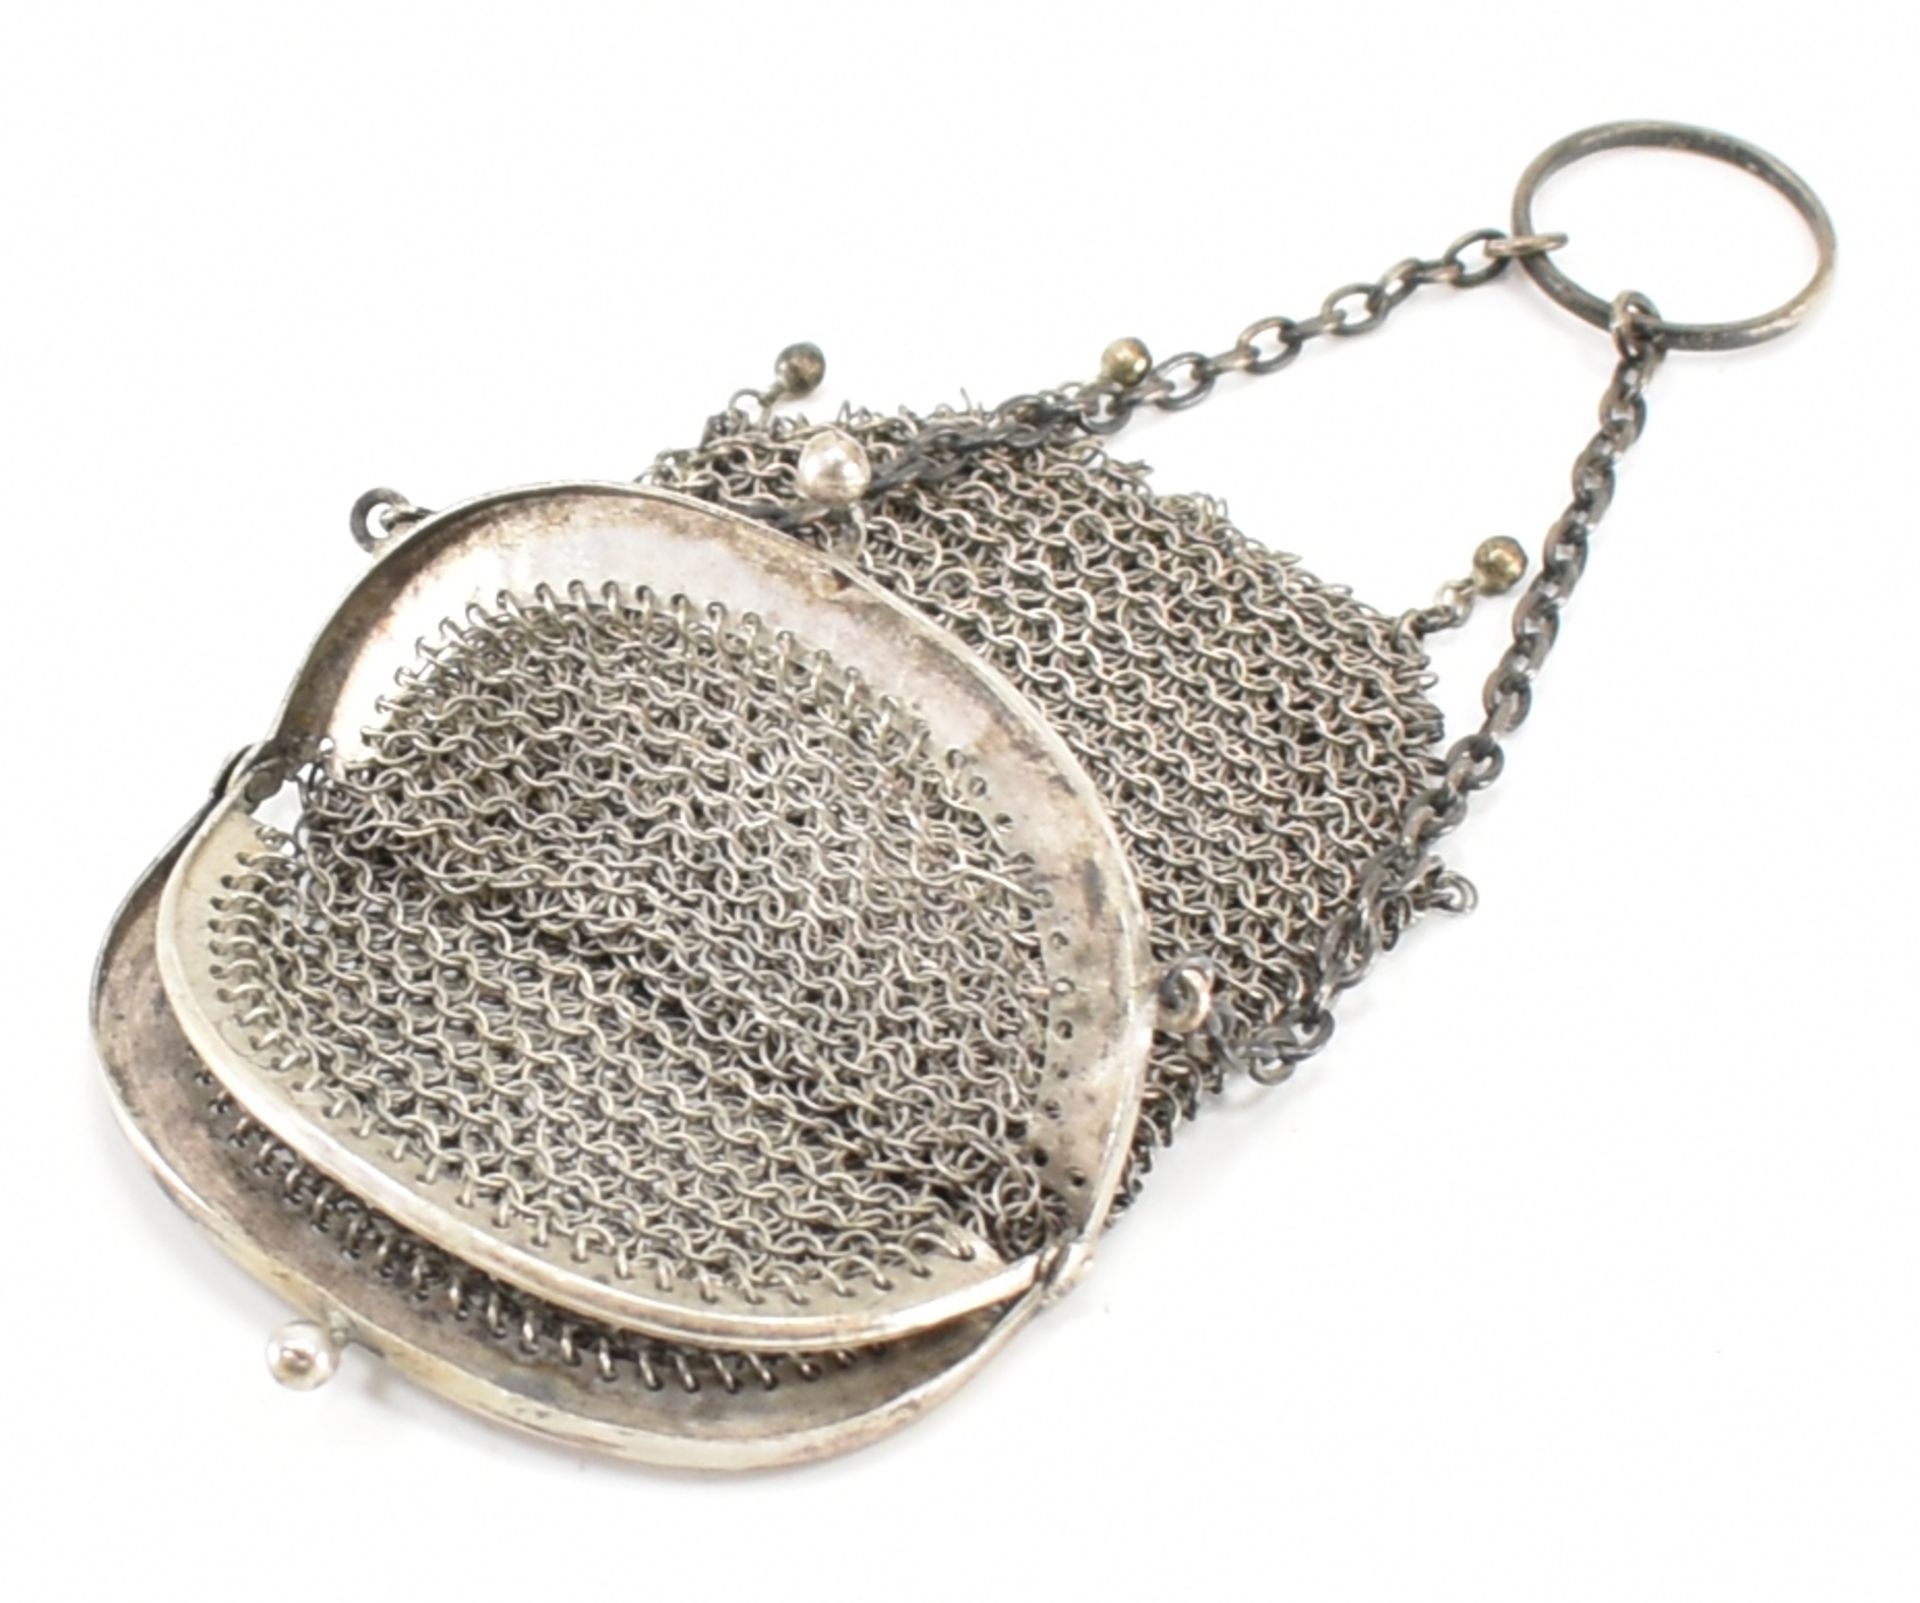 SILVER WHITE METAL CHAINMAIL PURSE - Image 4 of 4